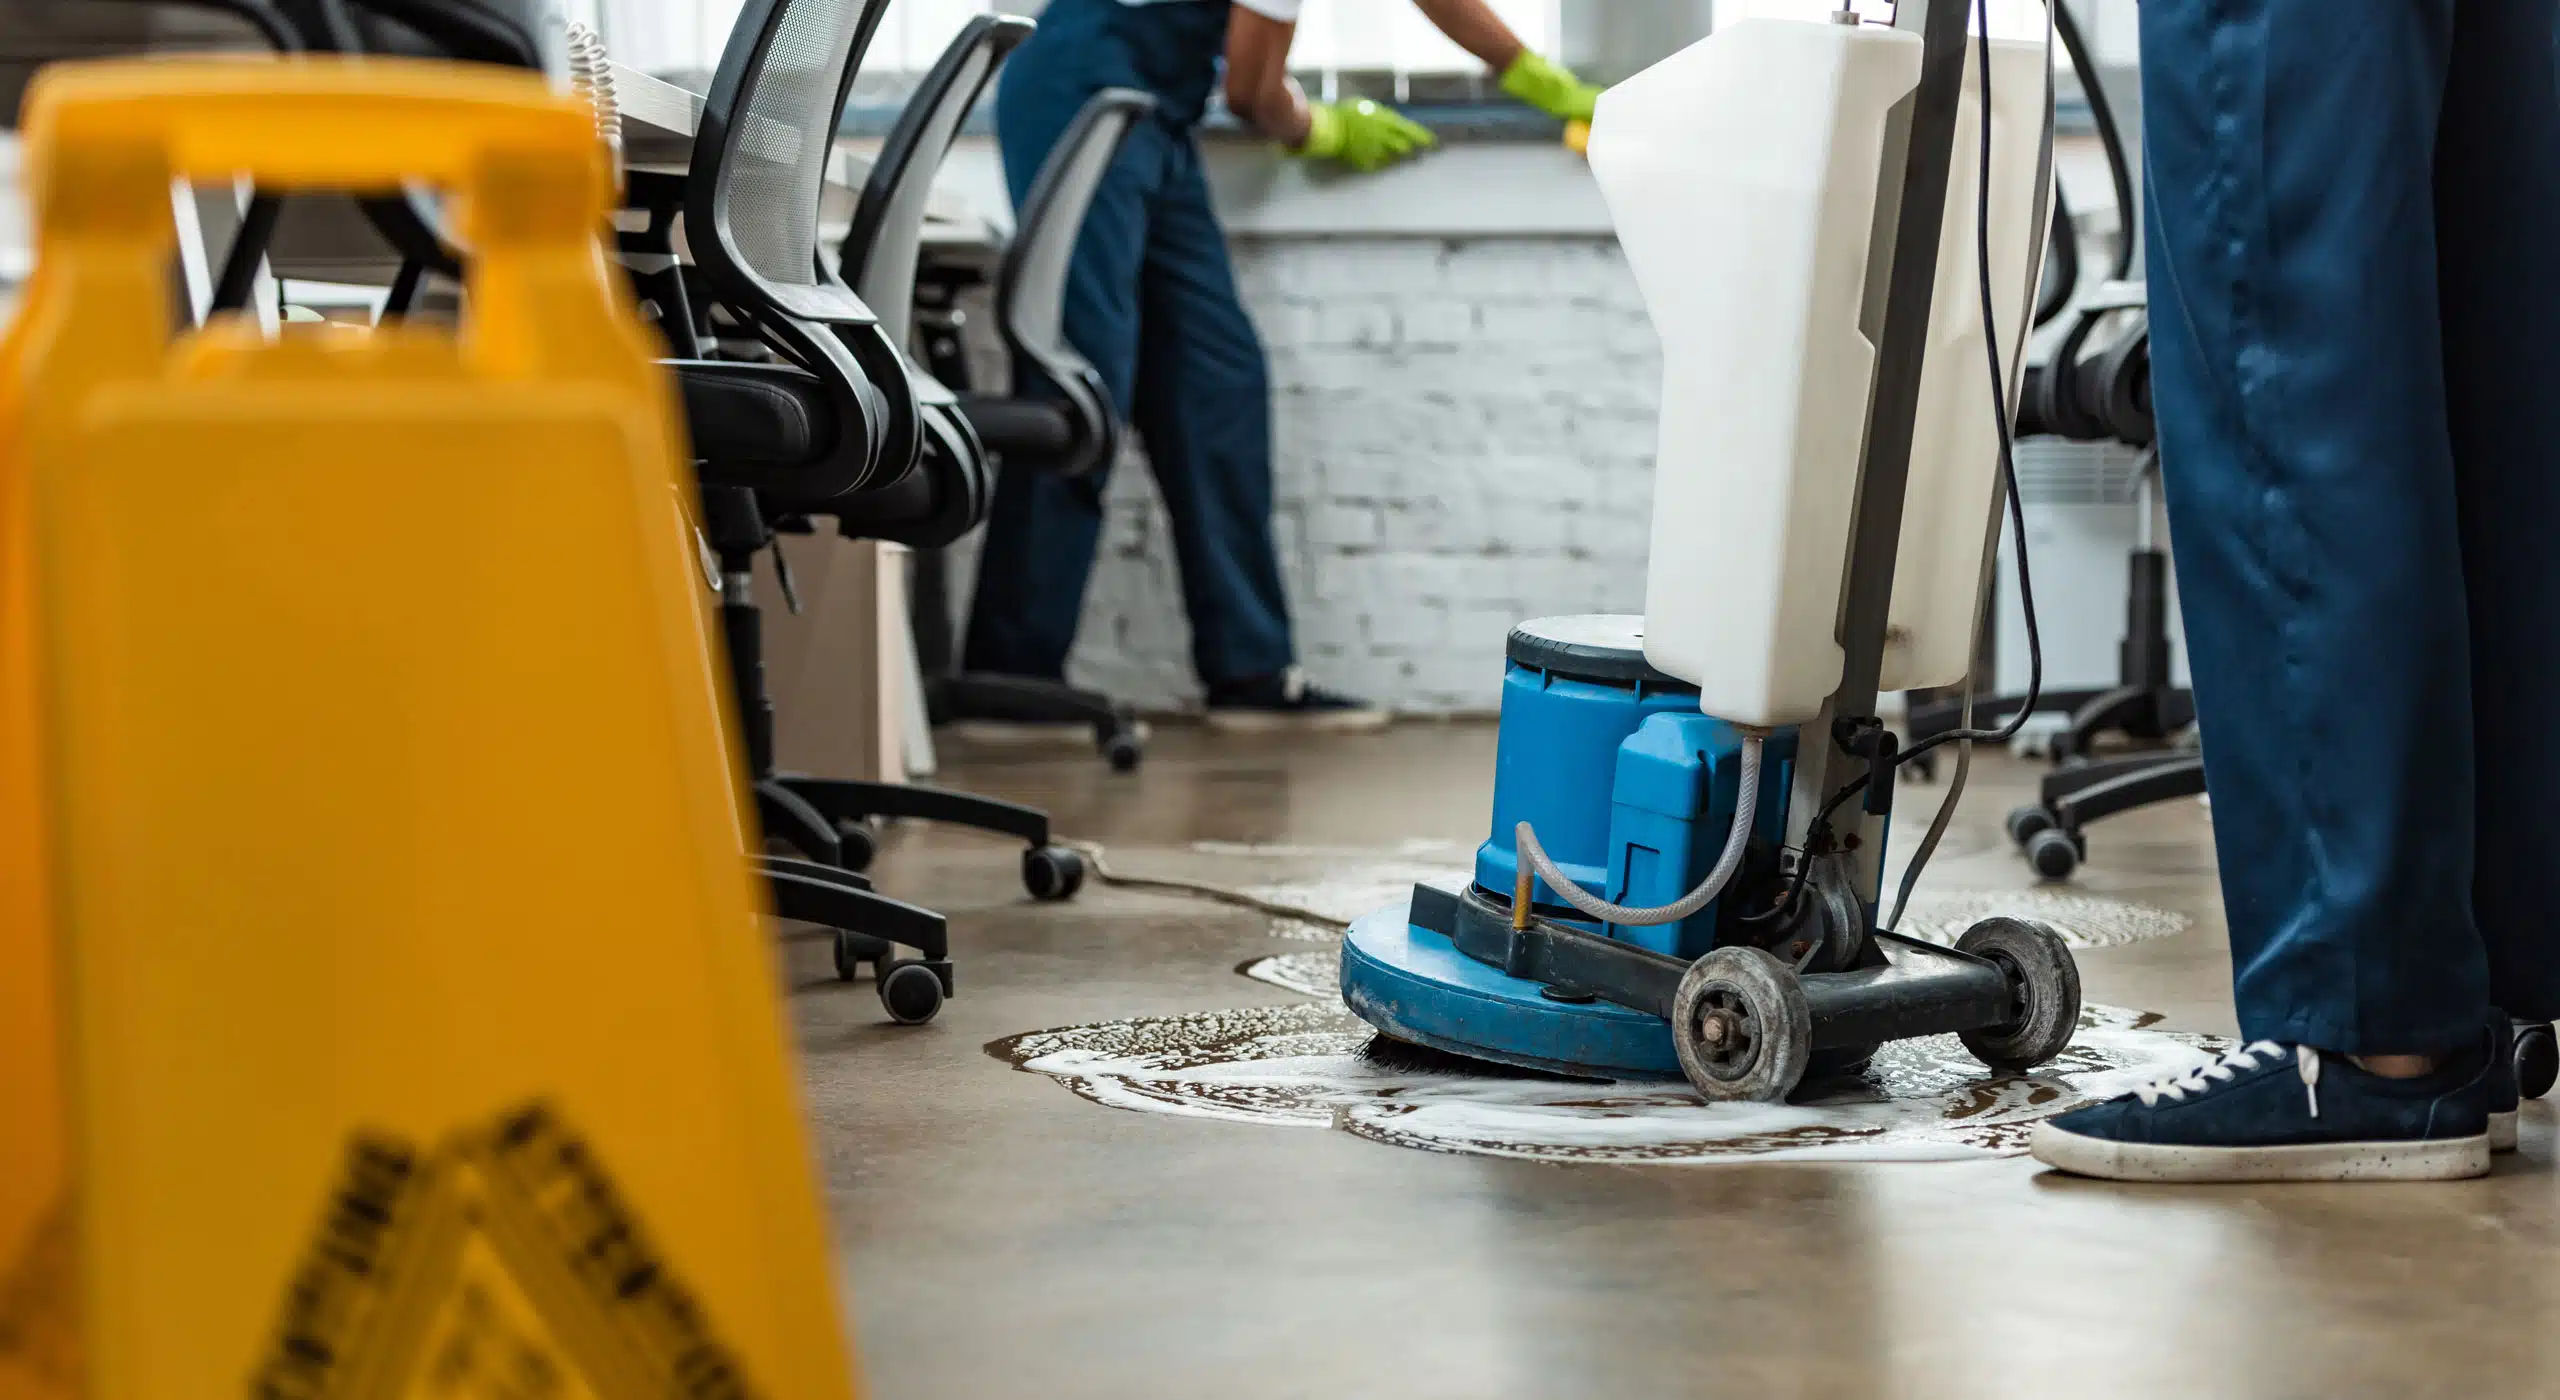 Closeup of a person using a floor cleaning machine on a commercial floor